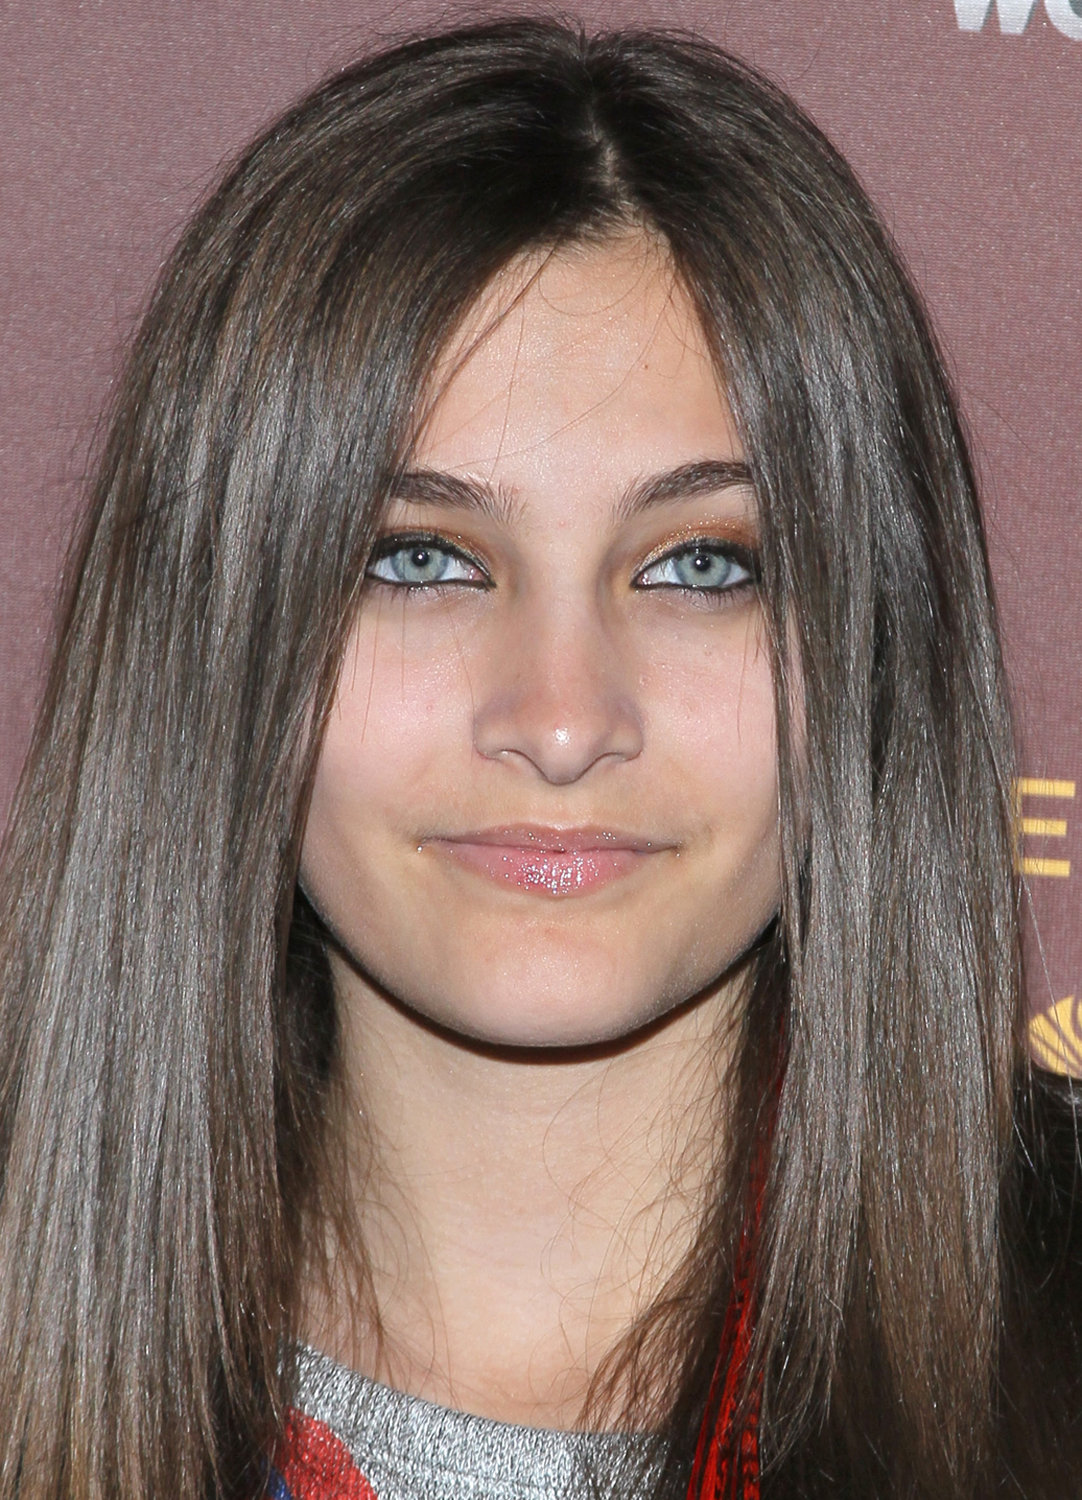 Paris Jackson destroyed by fiends on Facebook | Daily Star